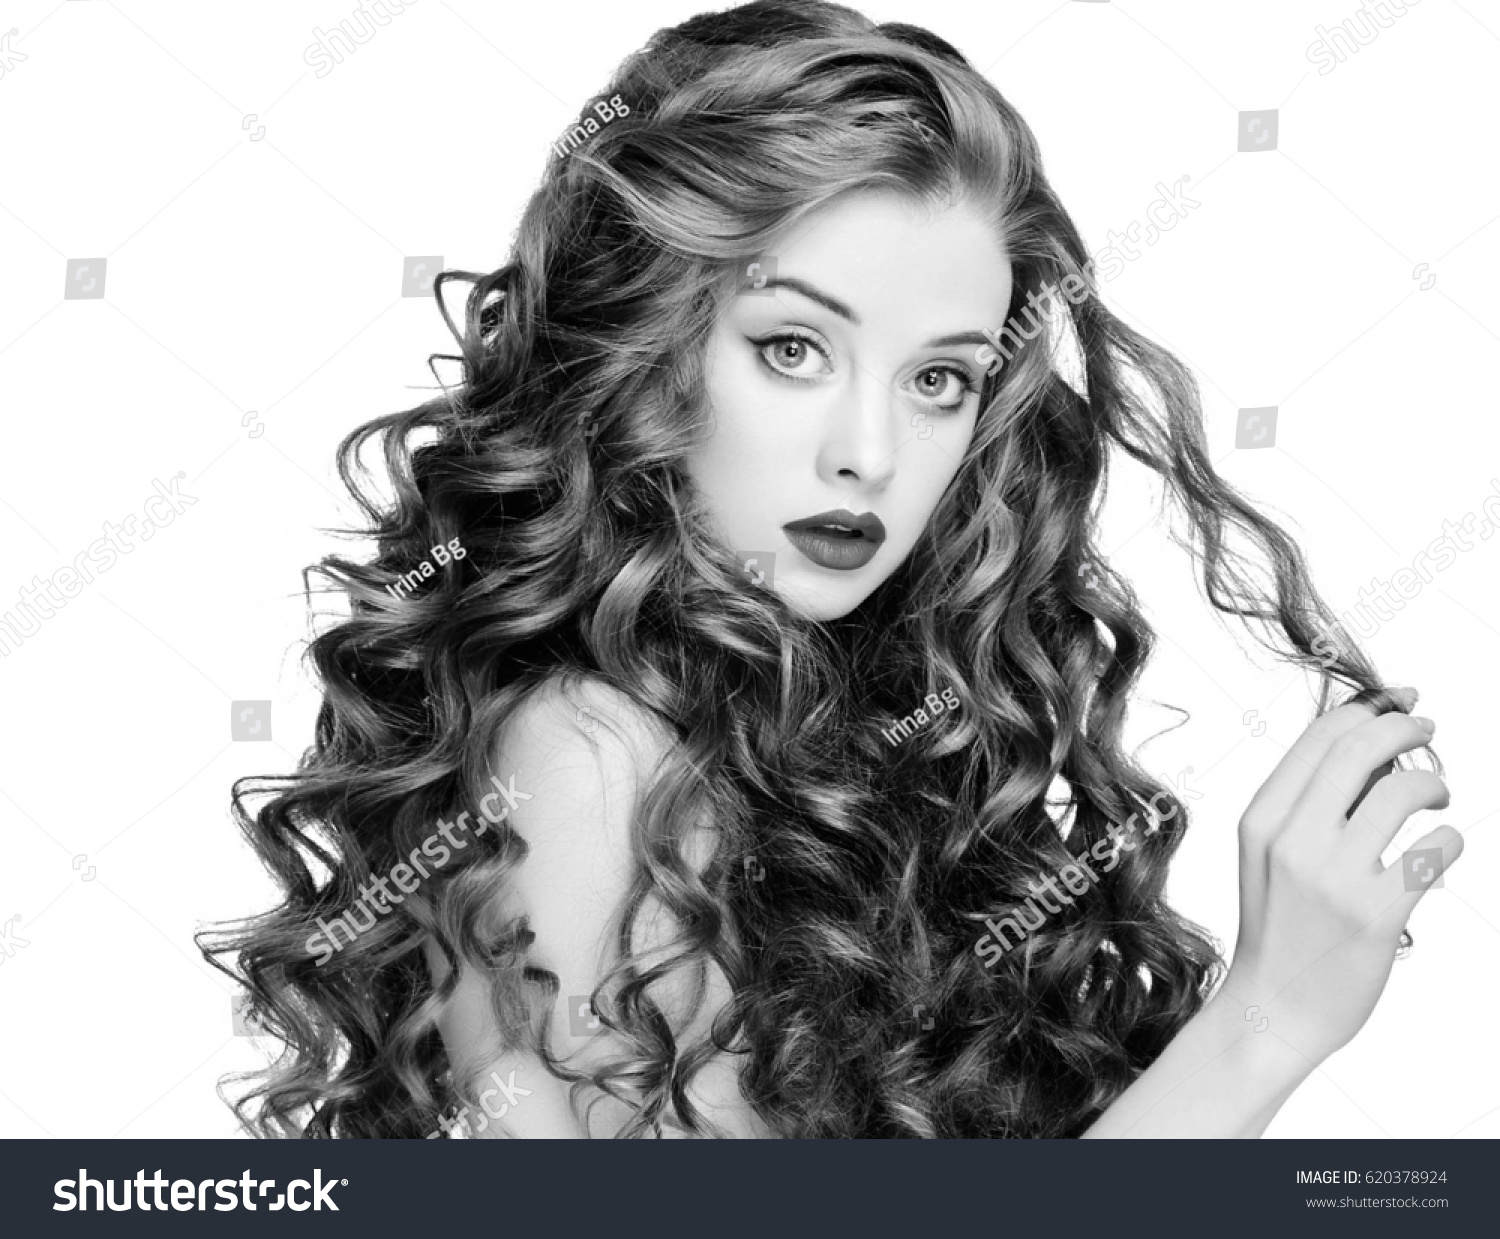 Beautiful People Woman Curly Hair Fashion Stock Photo Edit Now